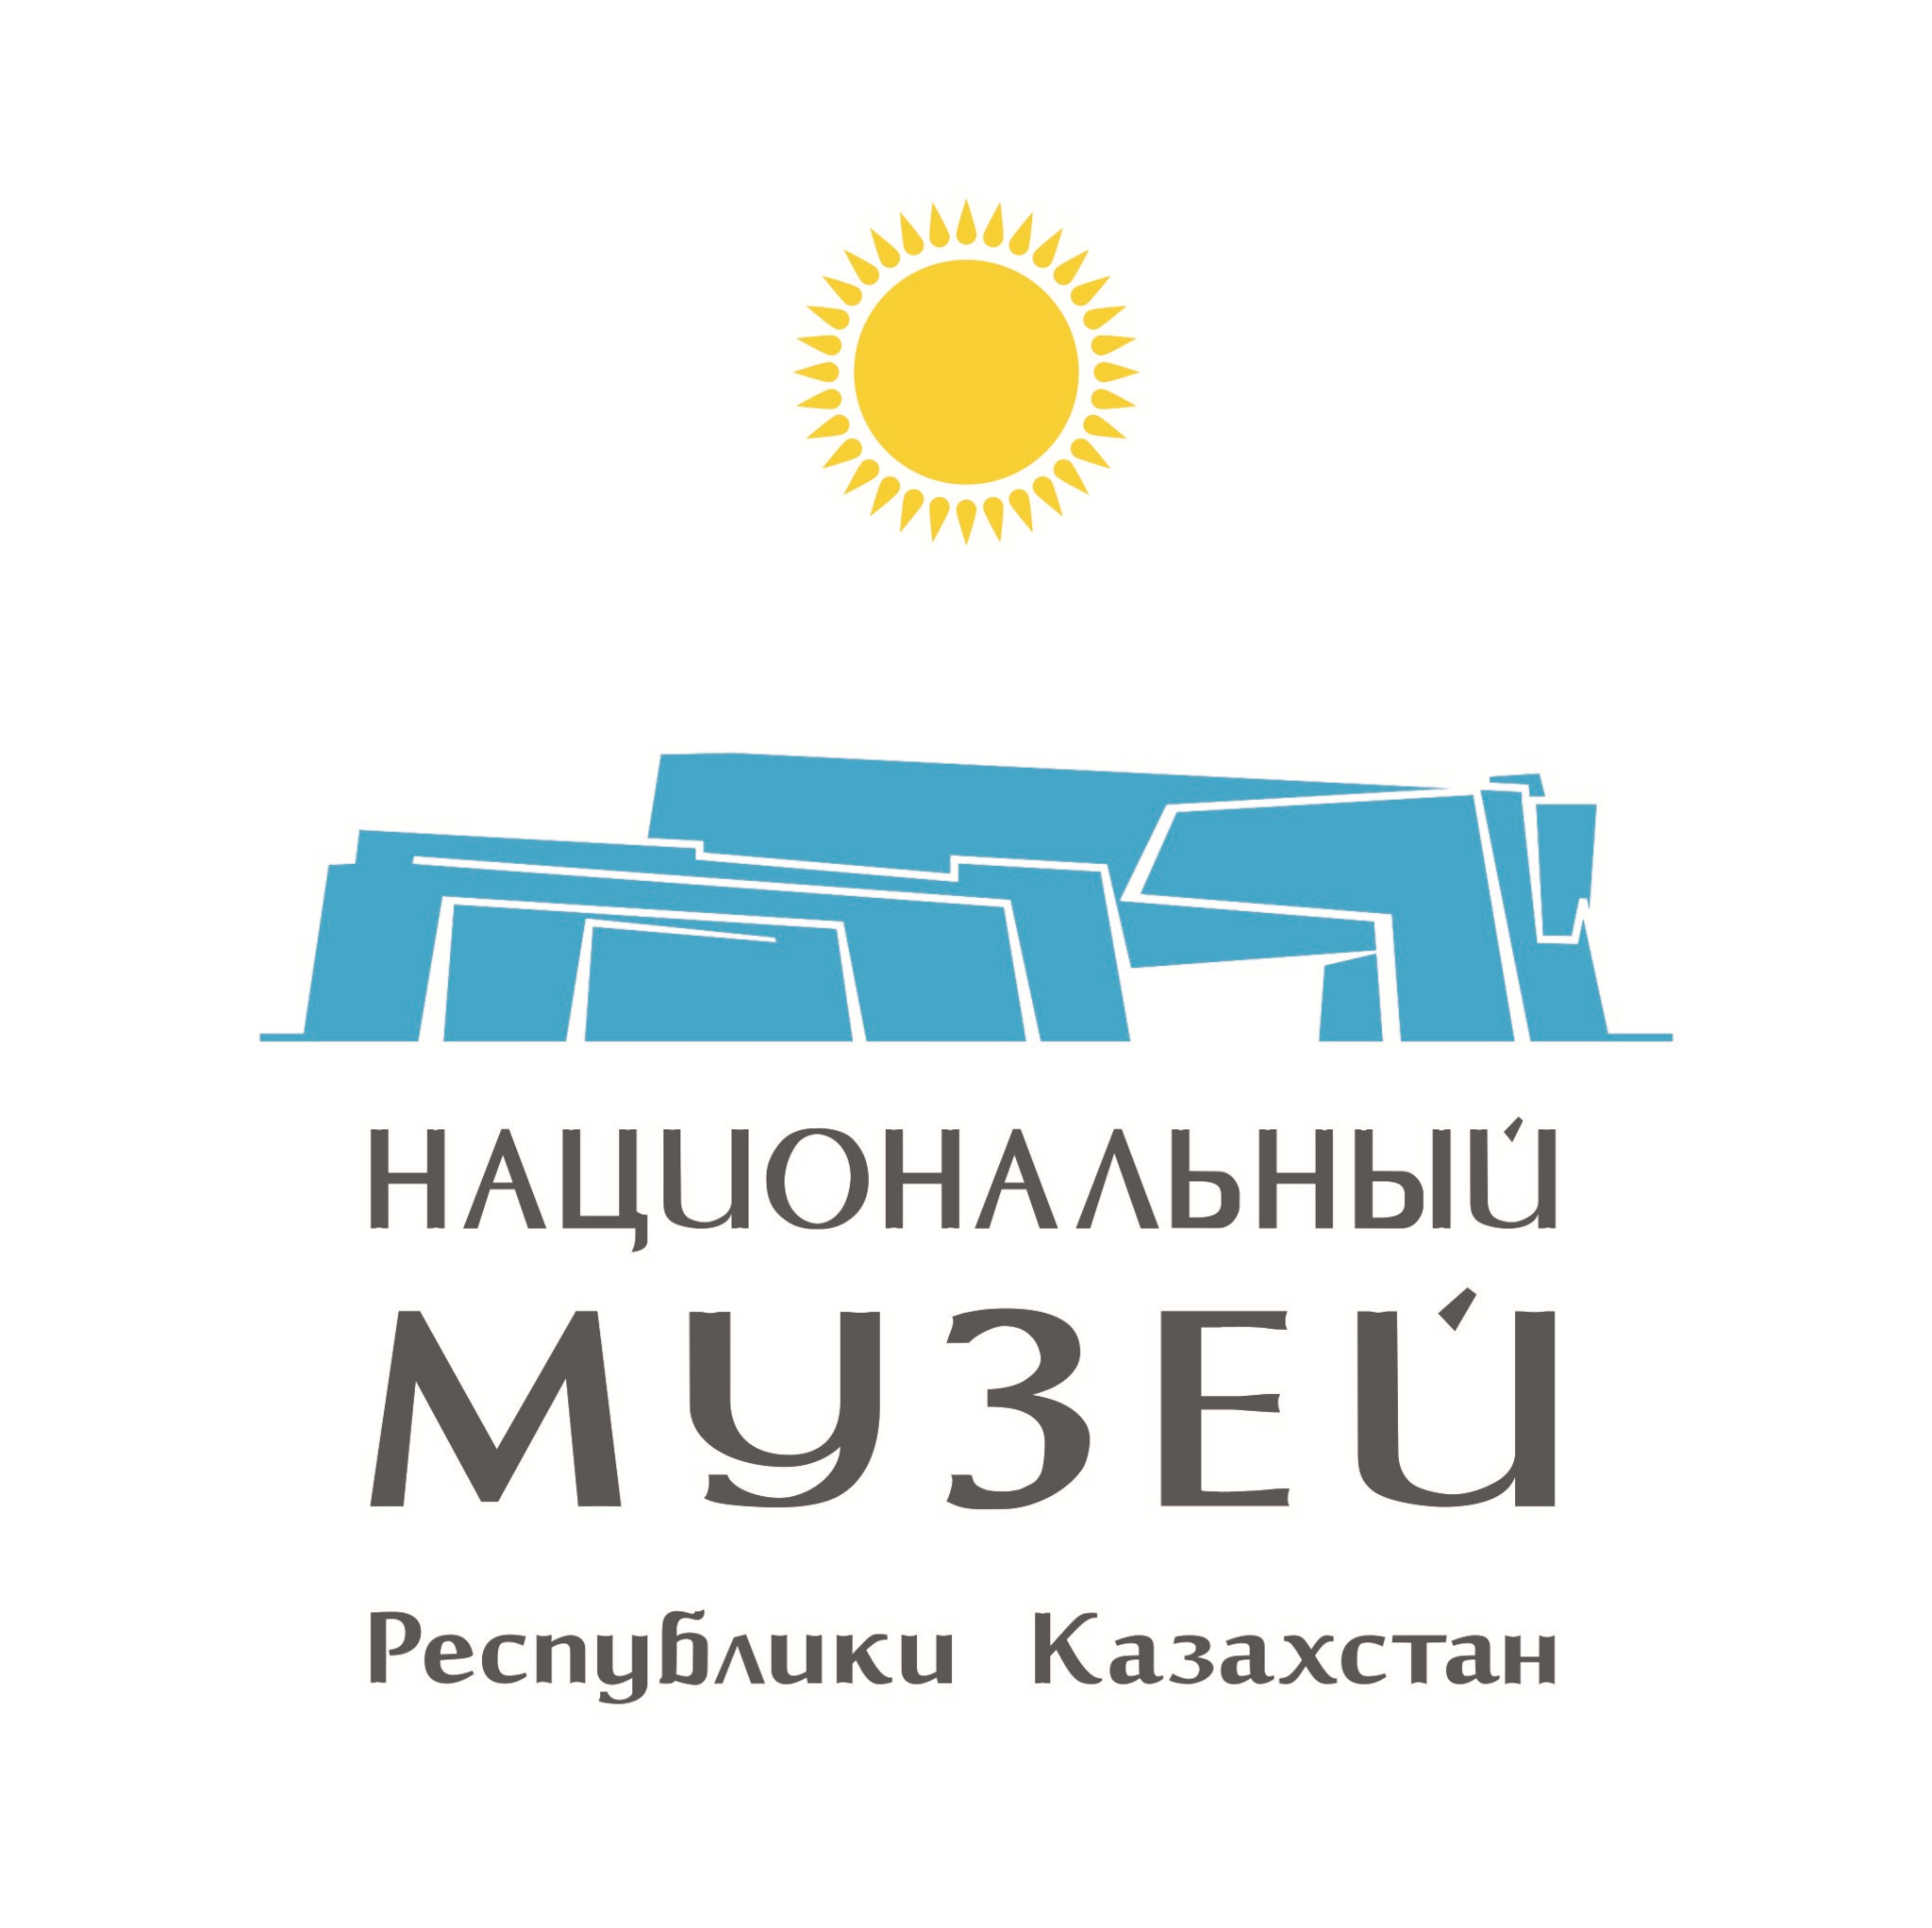 Our events National Museum of the Republic of Tatarstan on December 2016